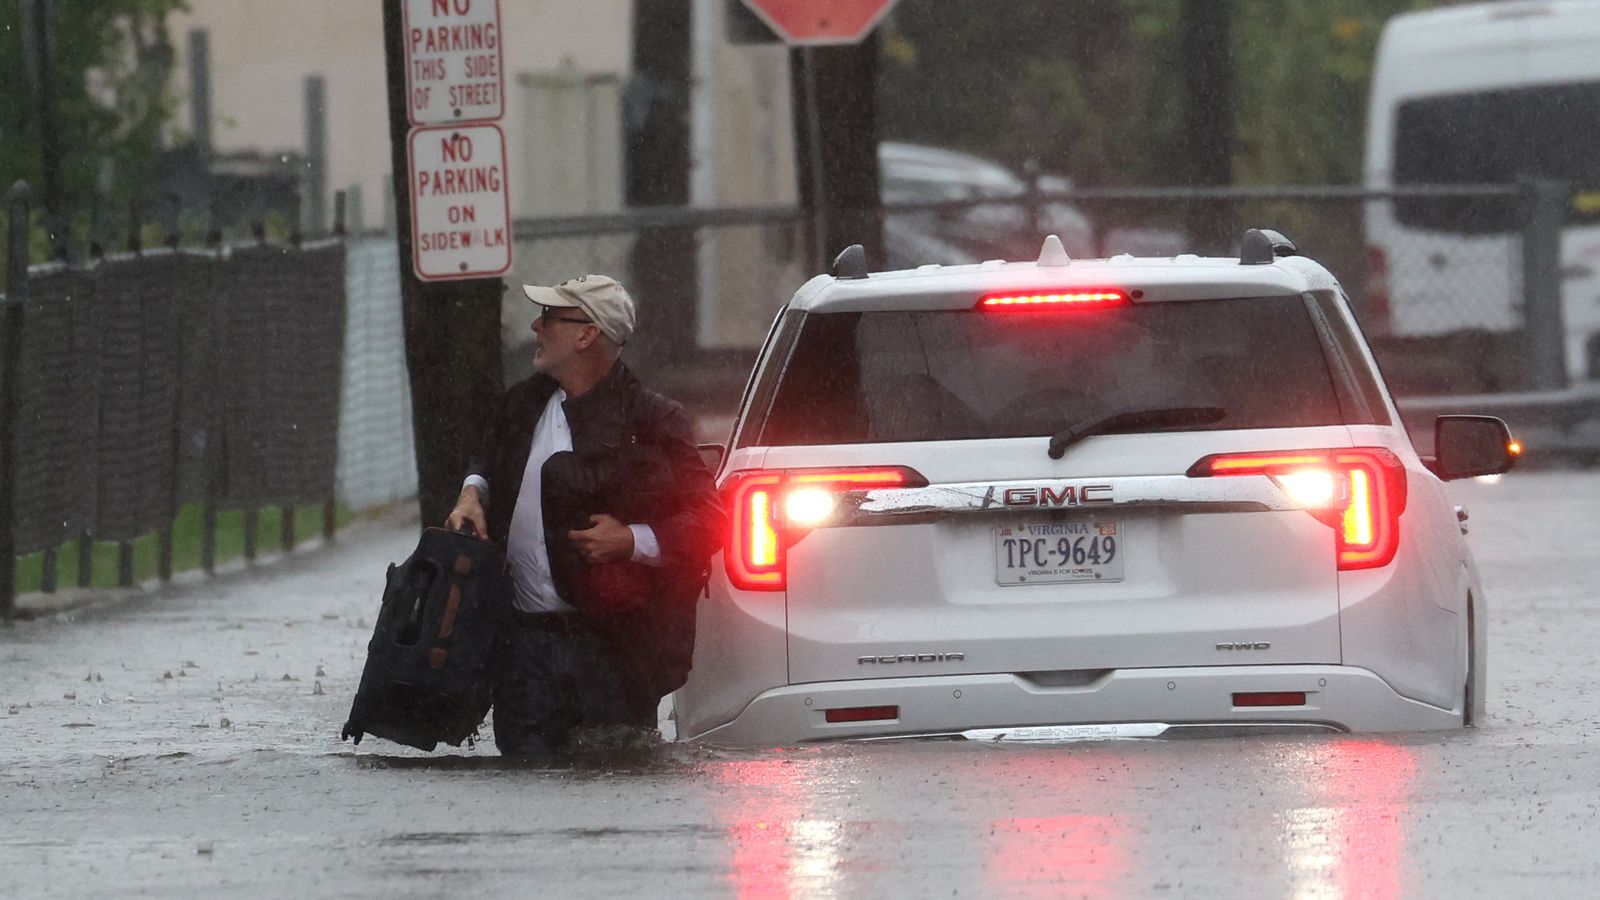 New York: State of emergency declared as 'life-threatening storm' causes widespread flooding